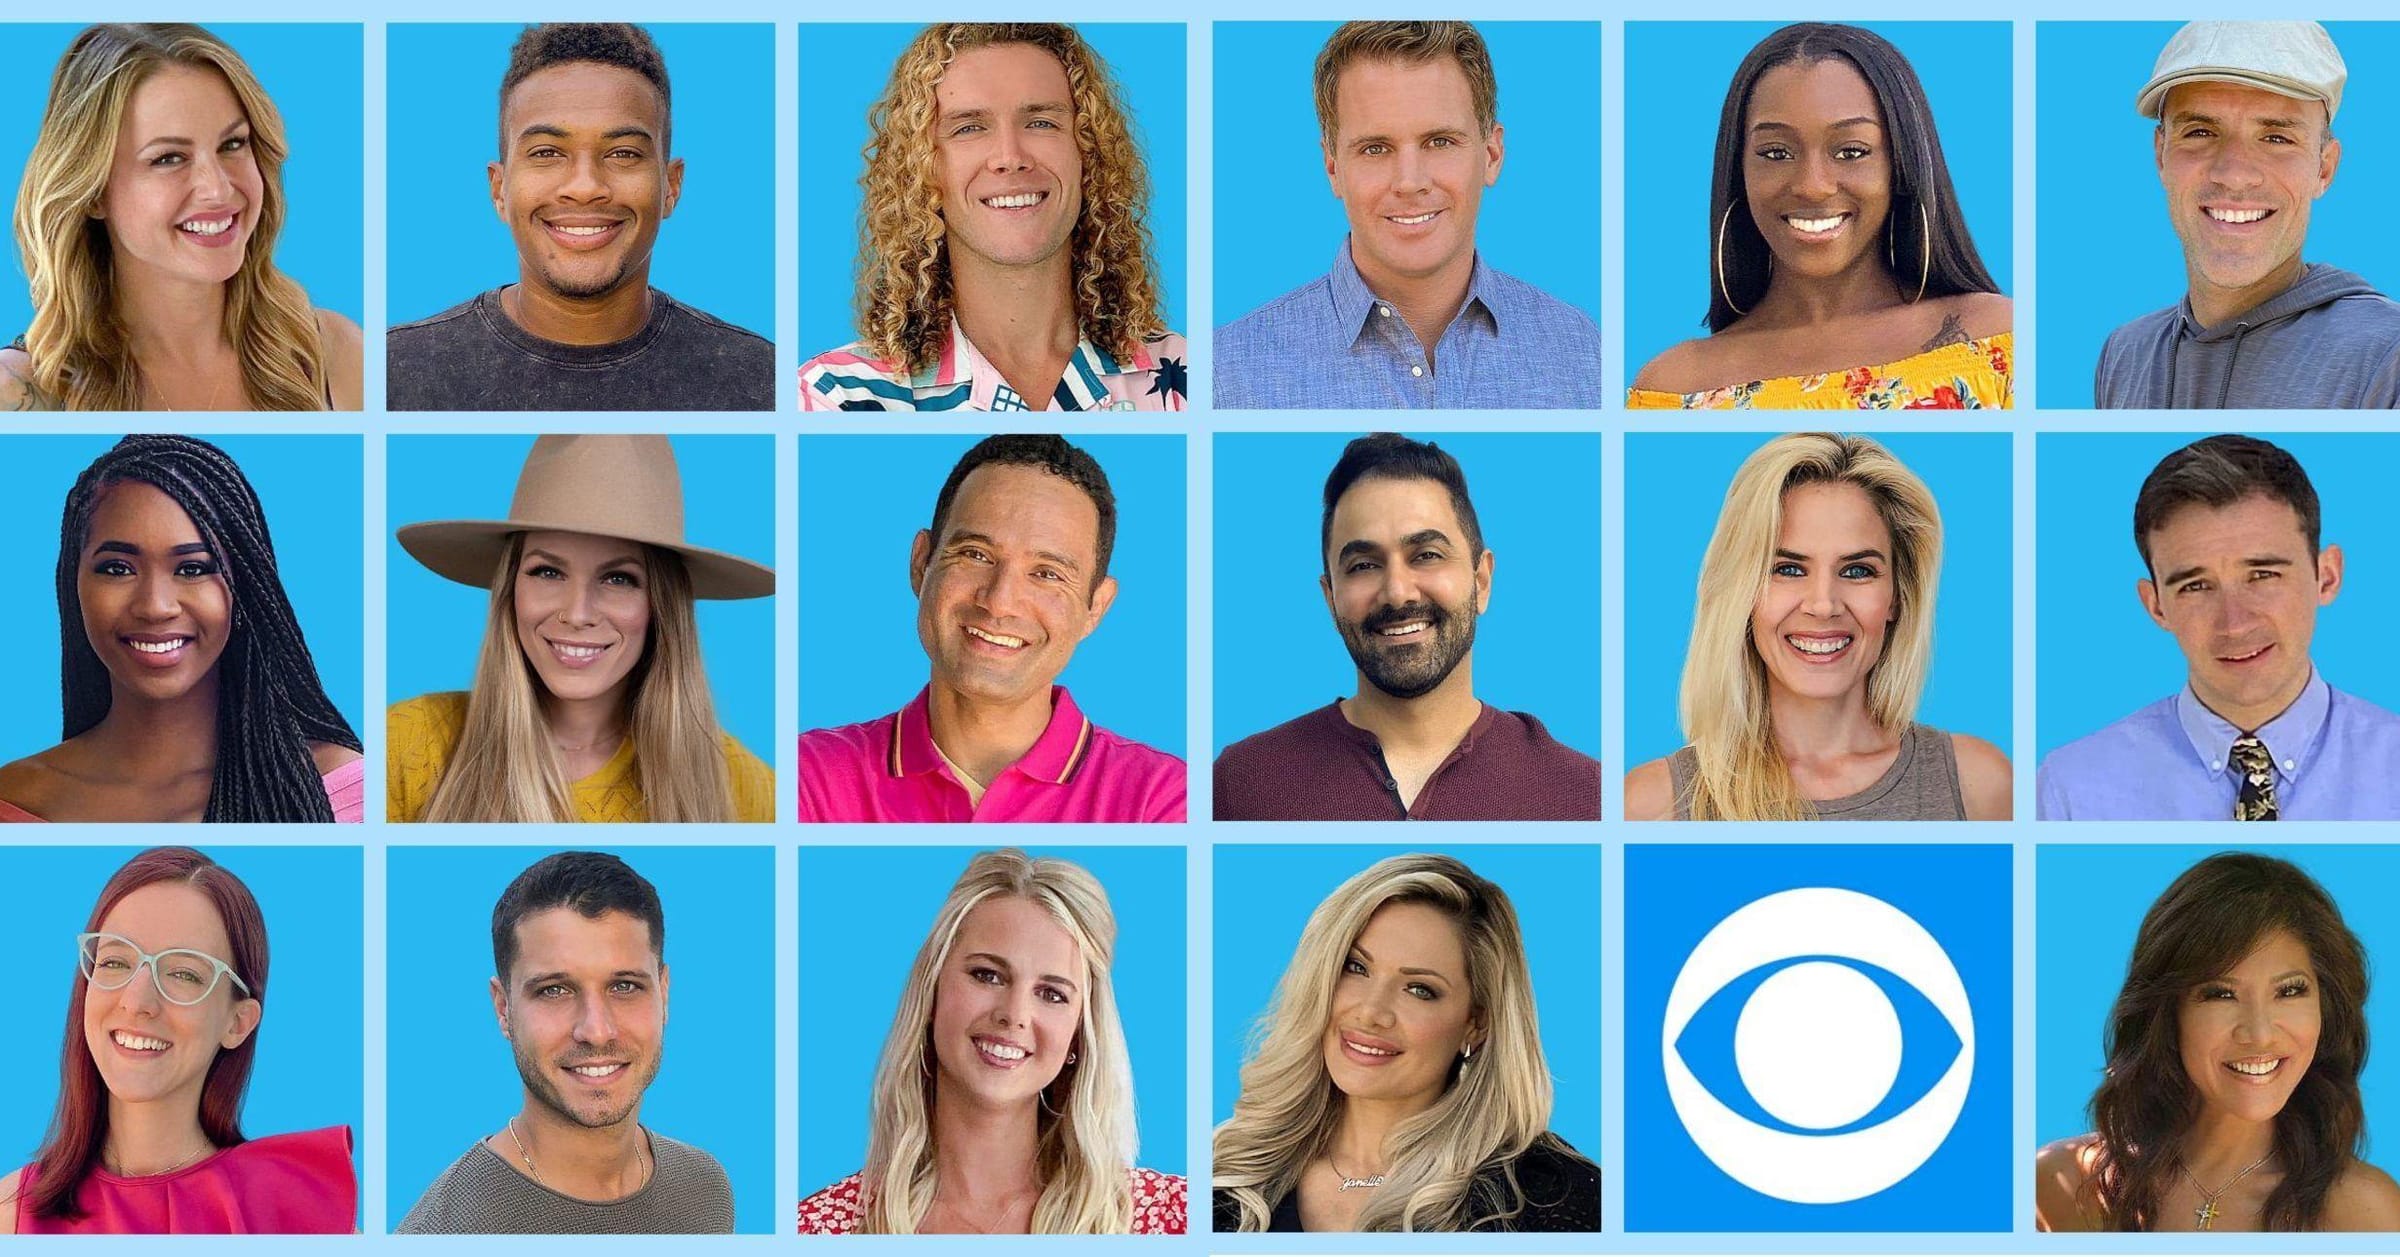 Apply to be a Big Brother contestant